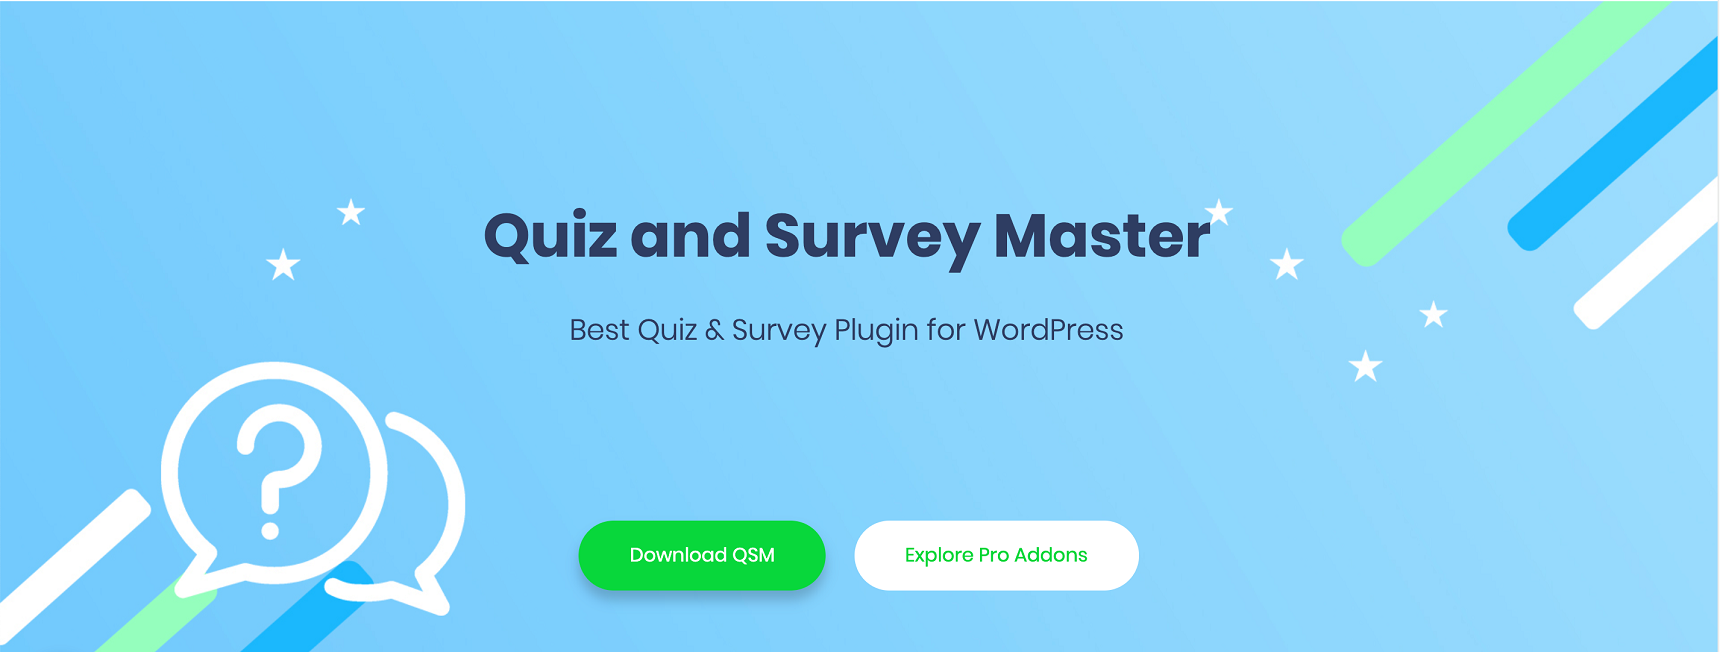 data collection and survey plugins - quiz and survey master